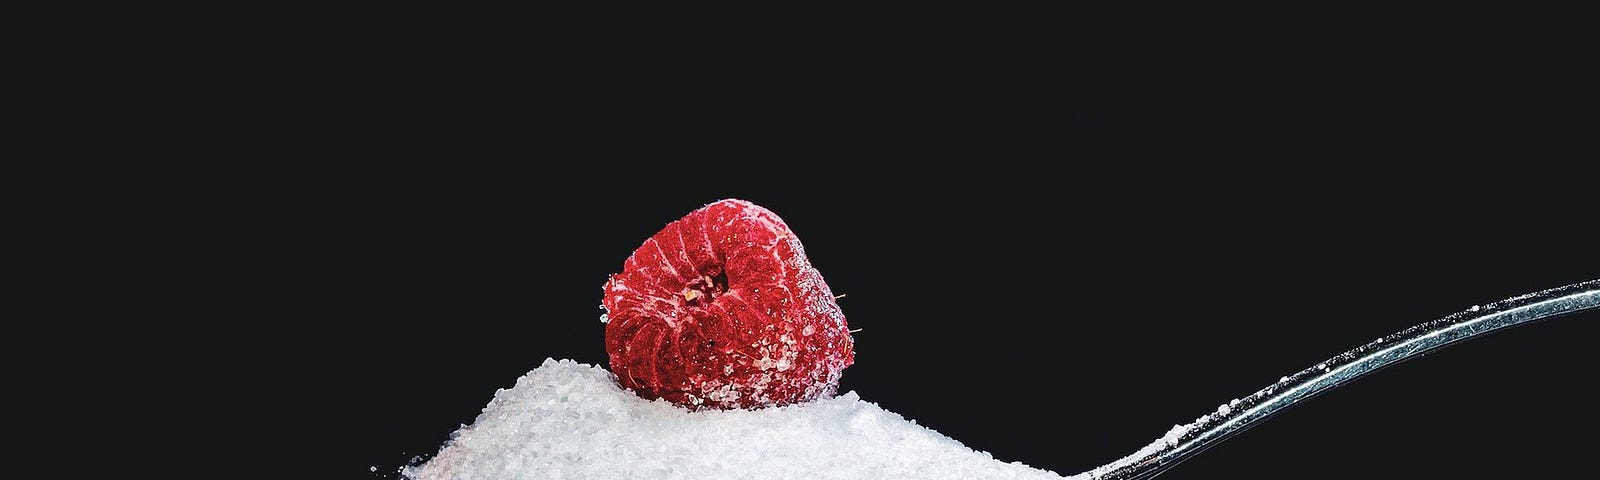 A raspberry on top of a teaspoon of sugar with grains of sugar spilling over the sides